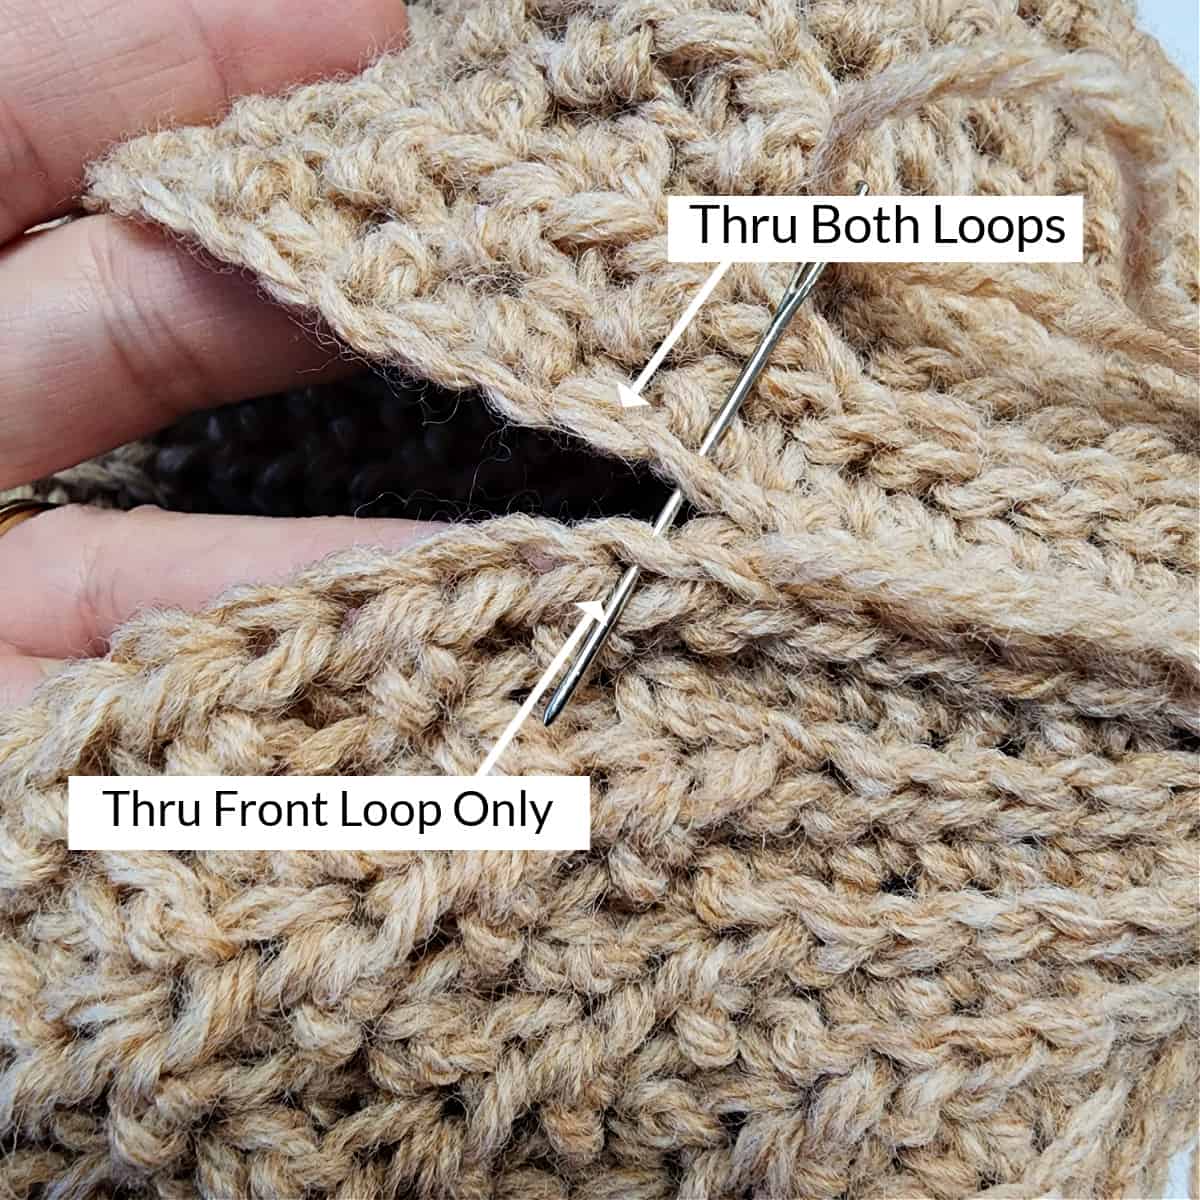 Yarn needle and white arrows showing direction to work the seam on the crochet hat.